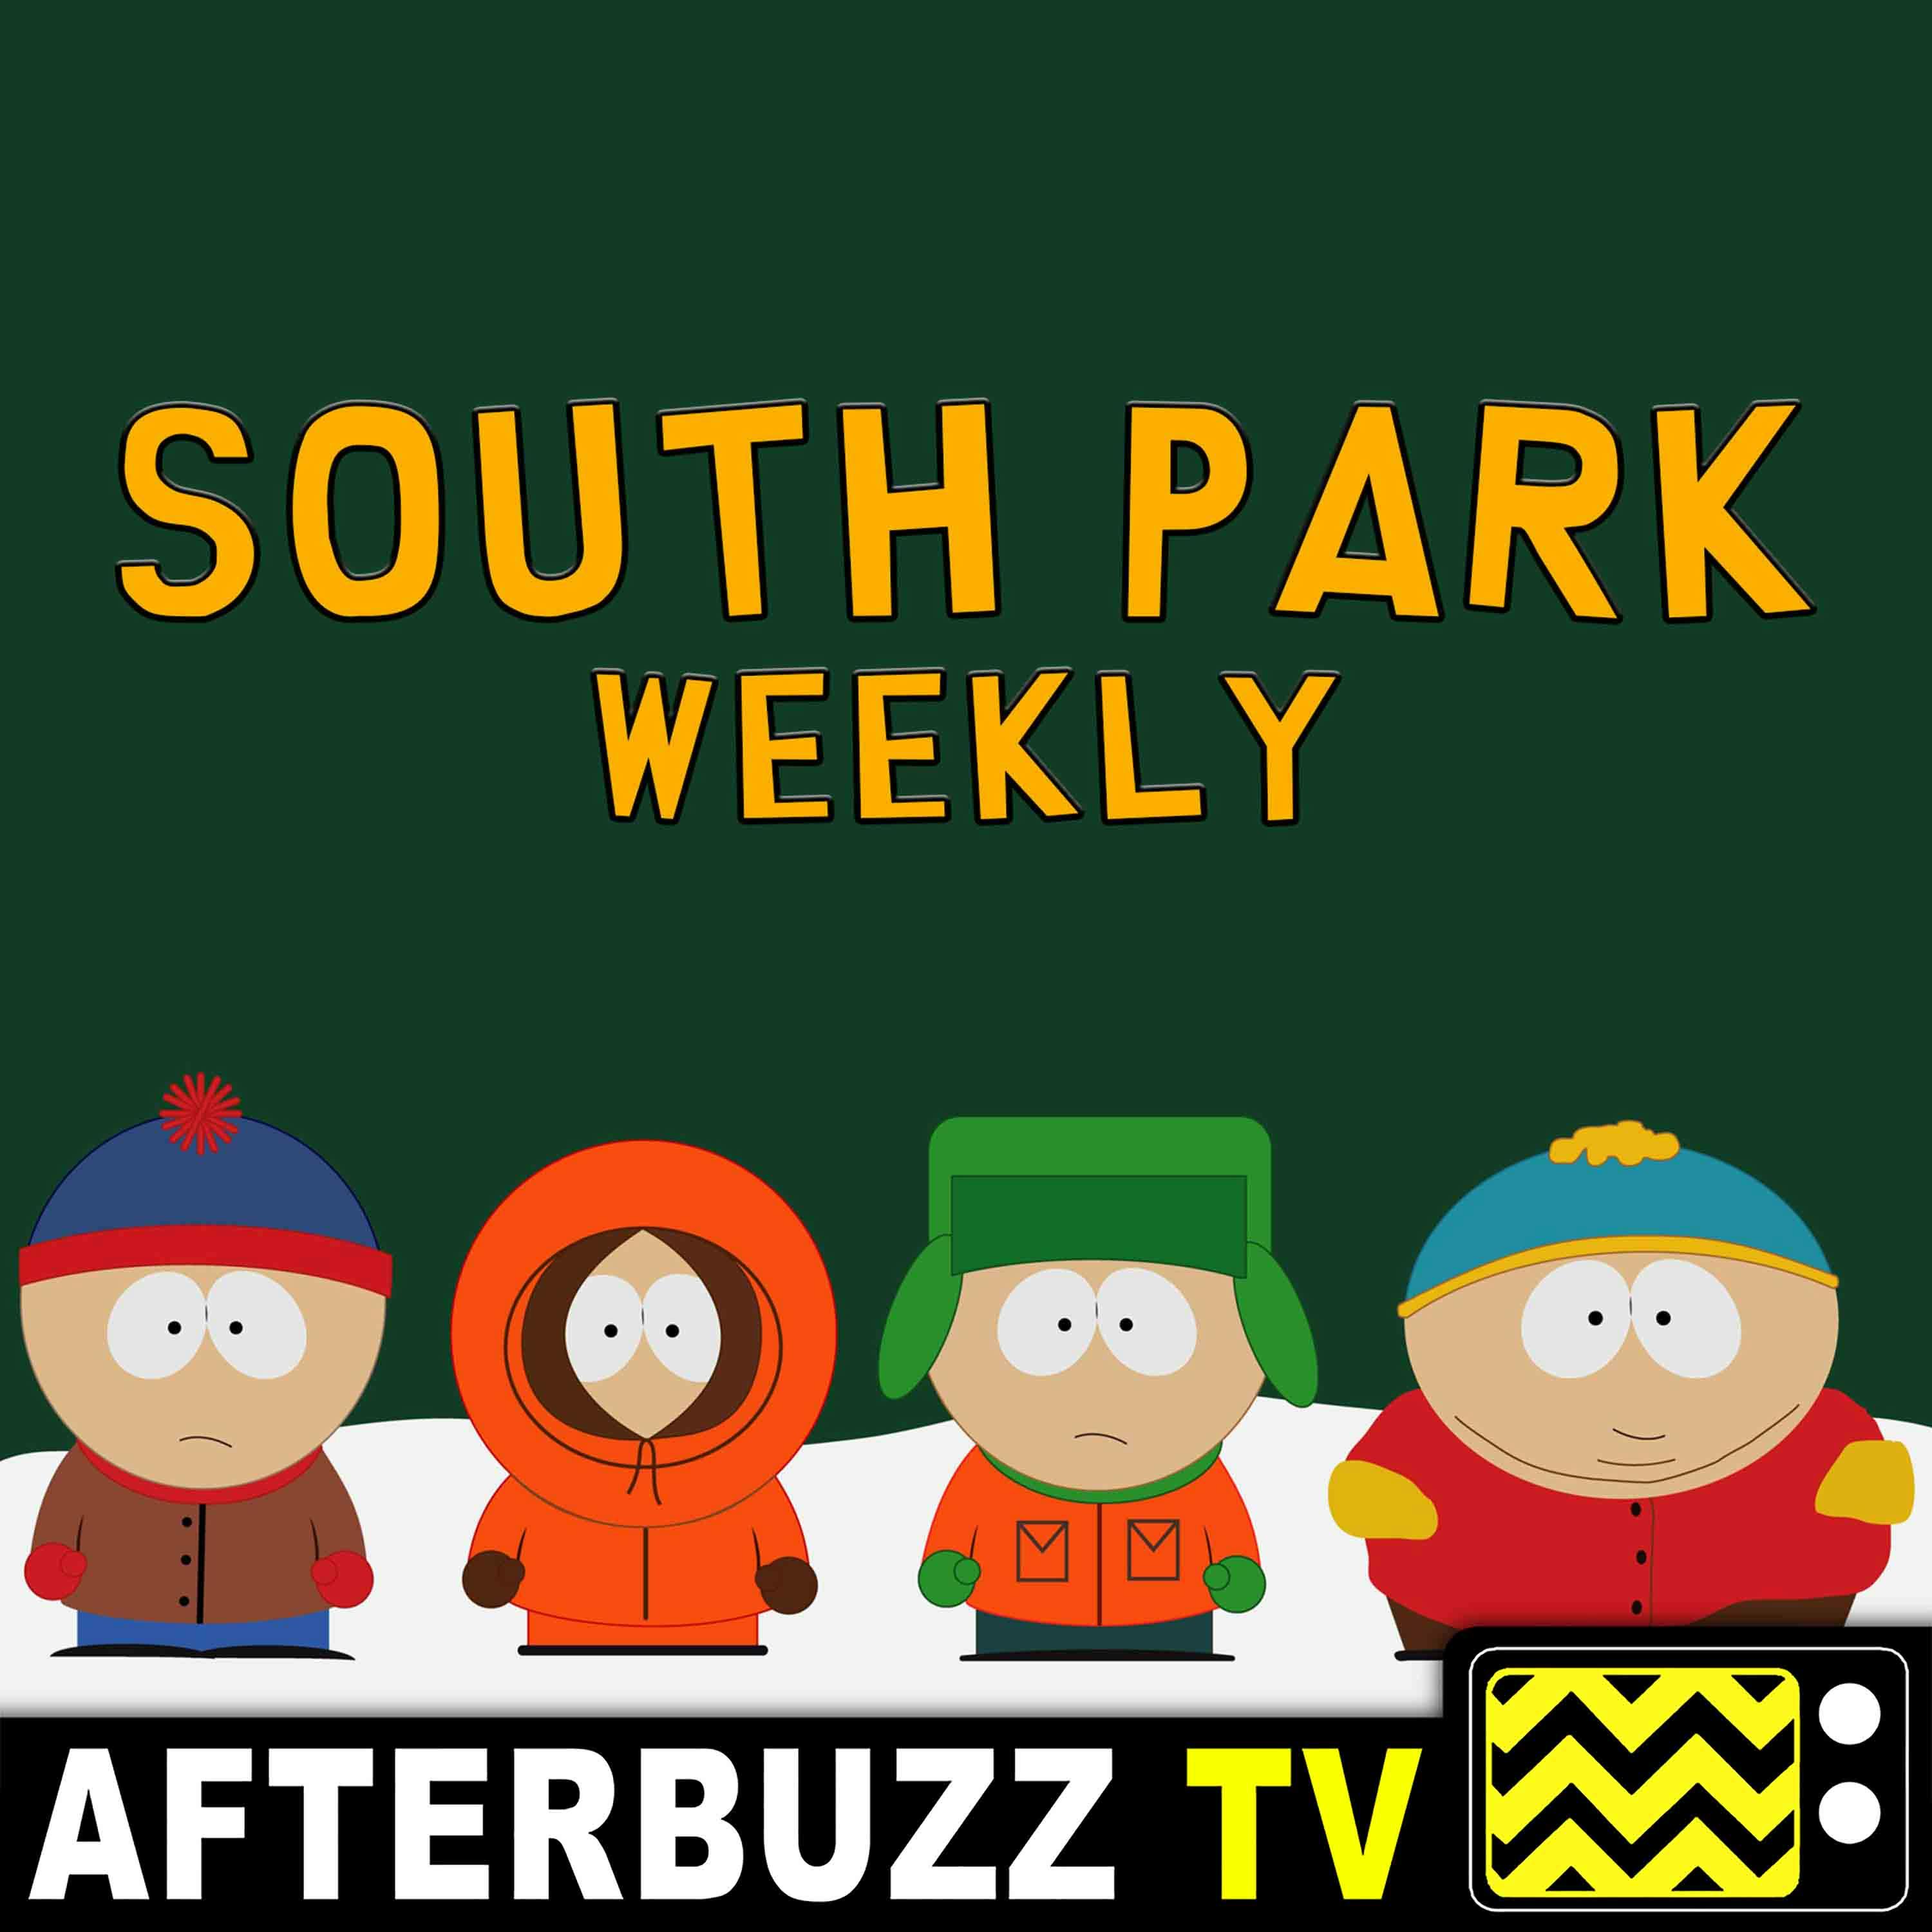 South Park S:20 | Weiners Out E:4 | AfterBuzz TV AfterShow